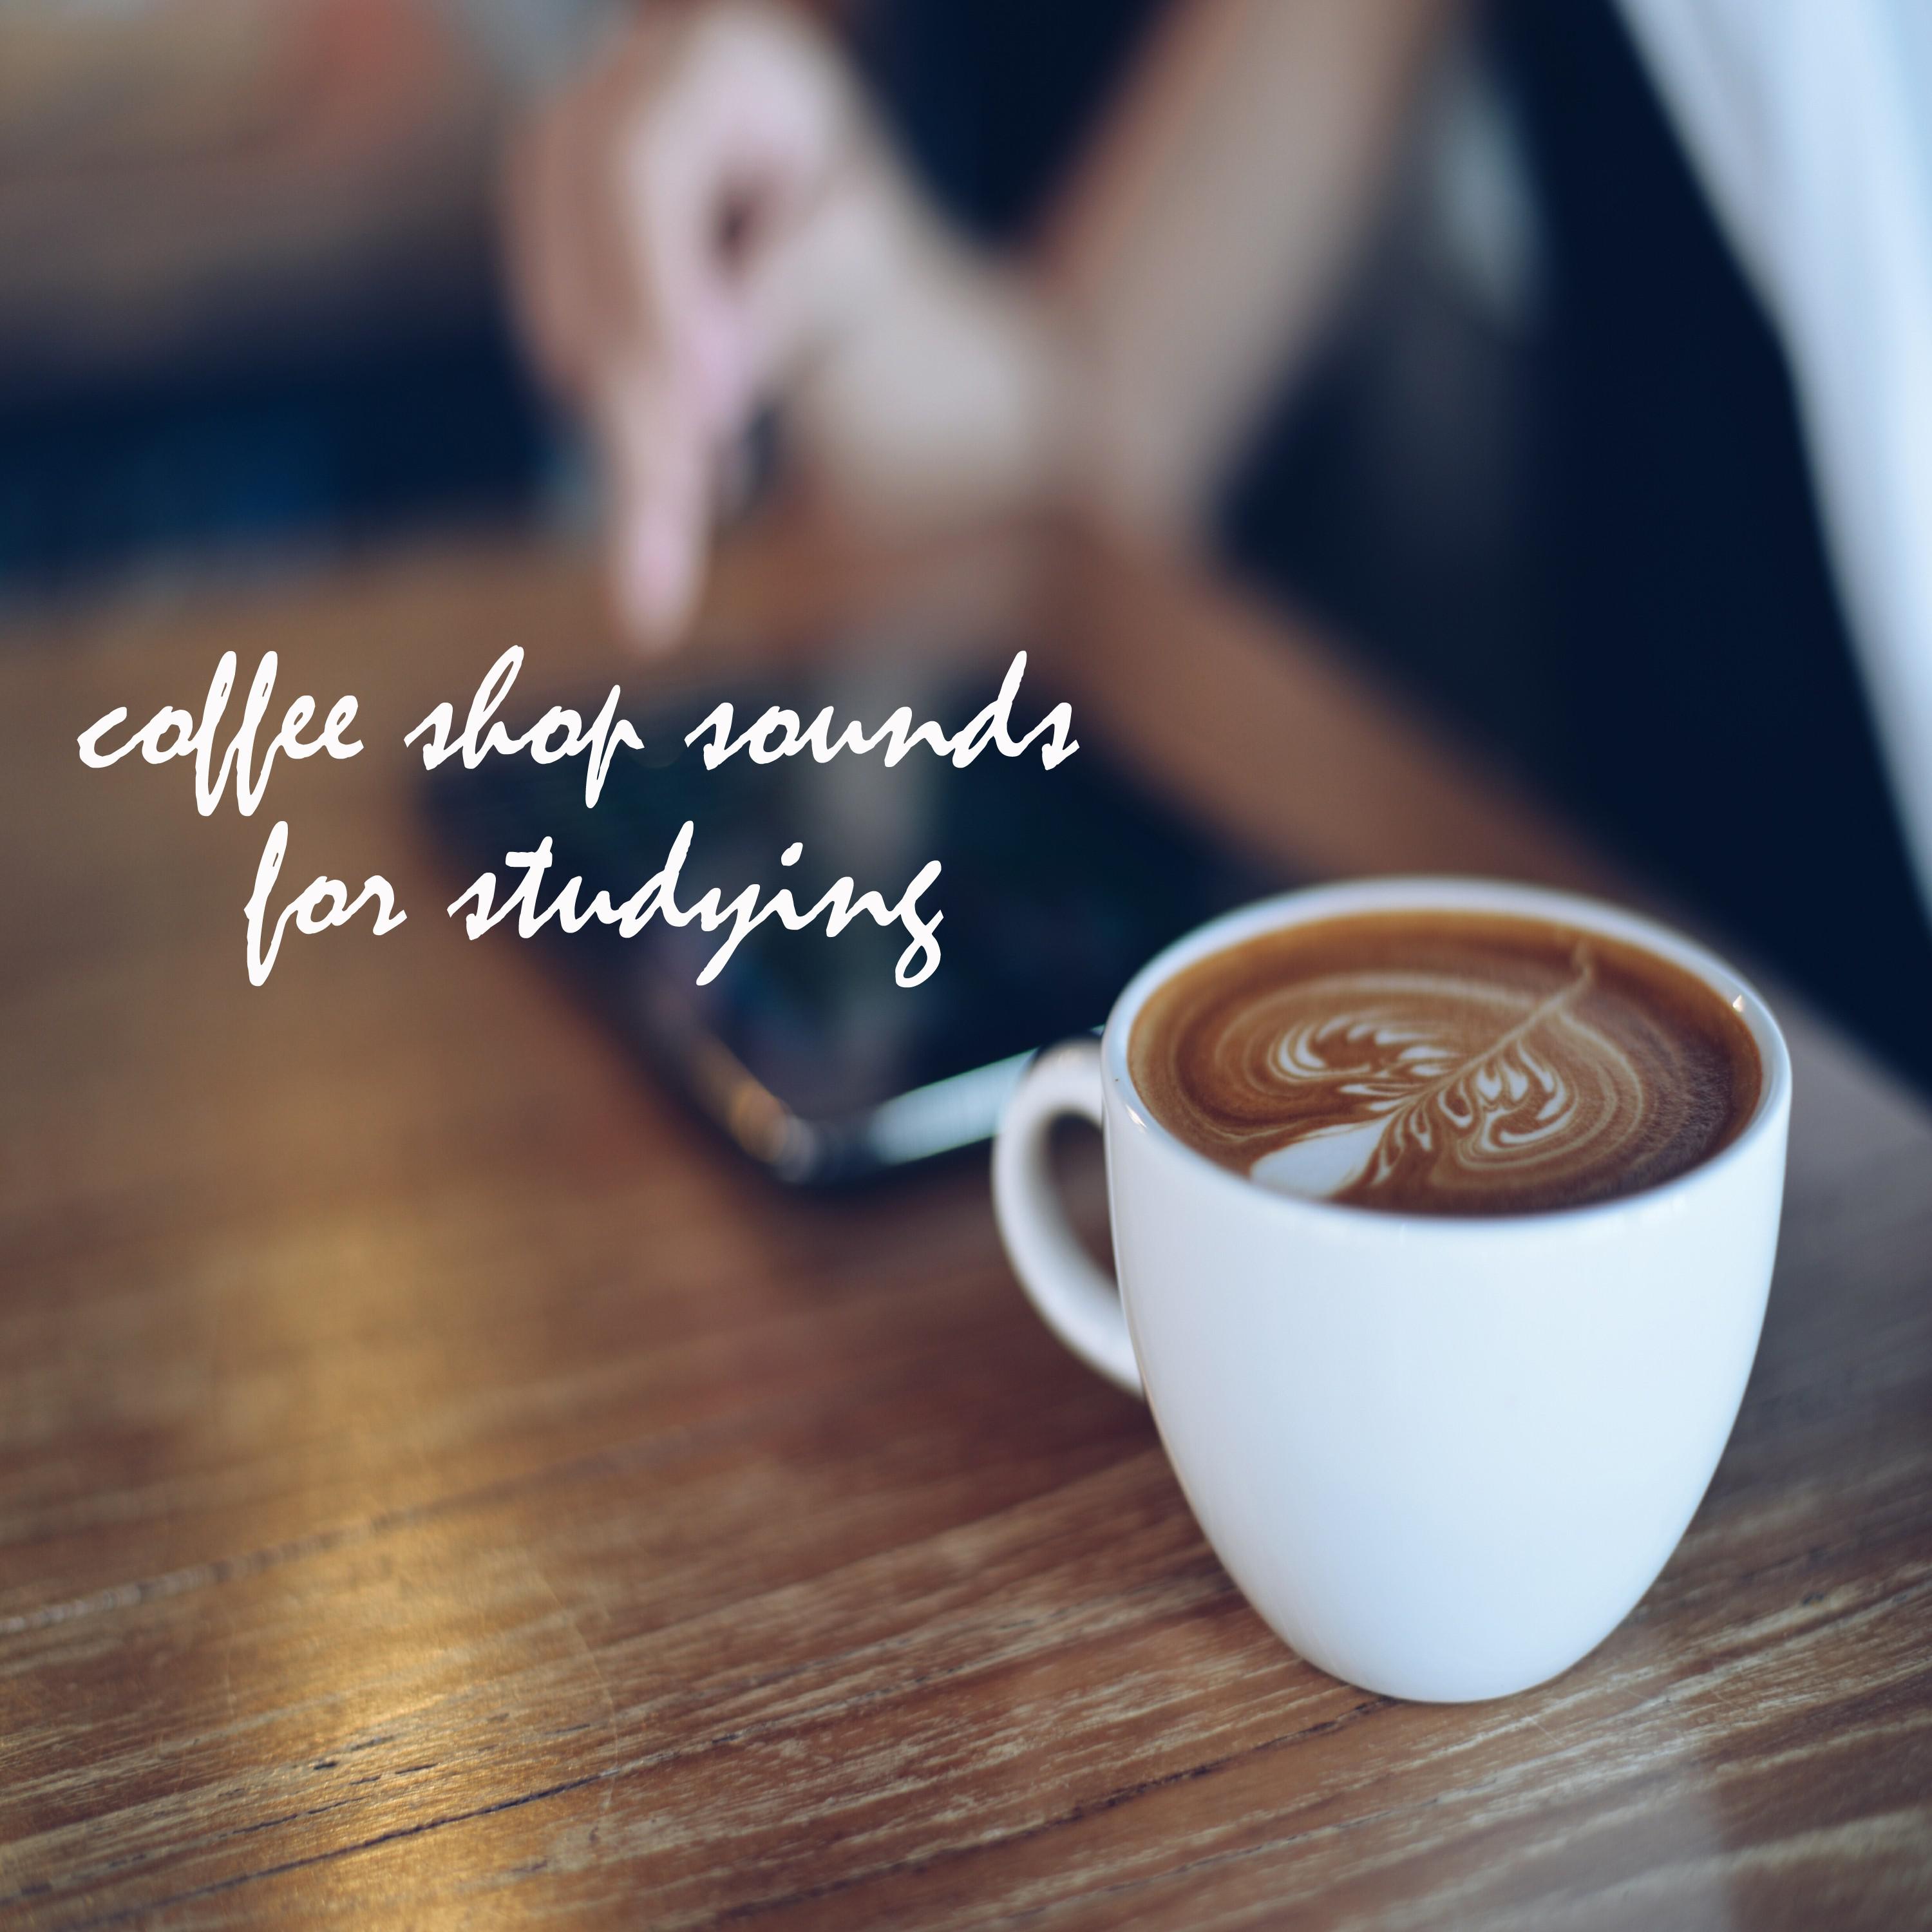 Coffee Shop Sounds for Studying and Working, Pt. 42